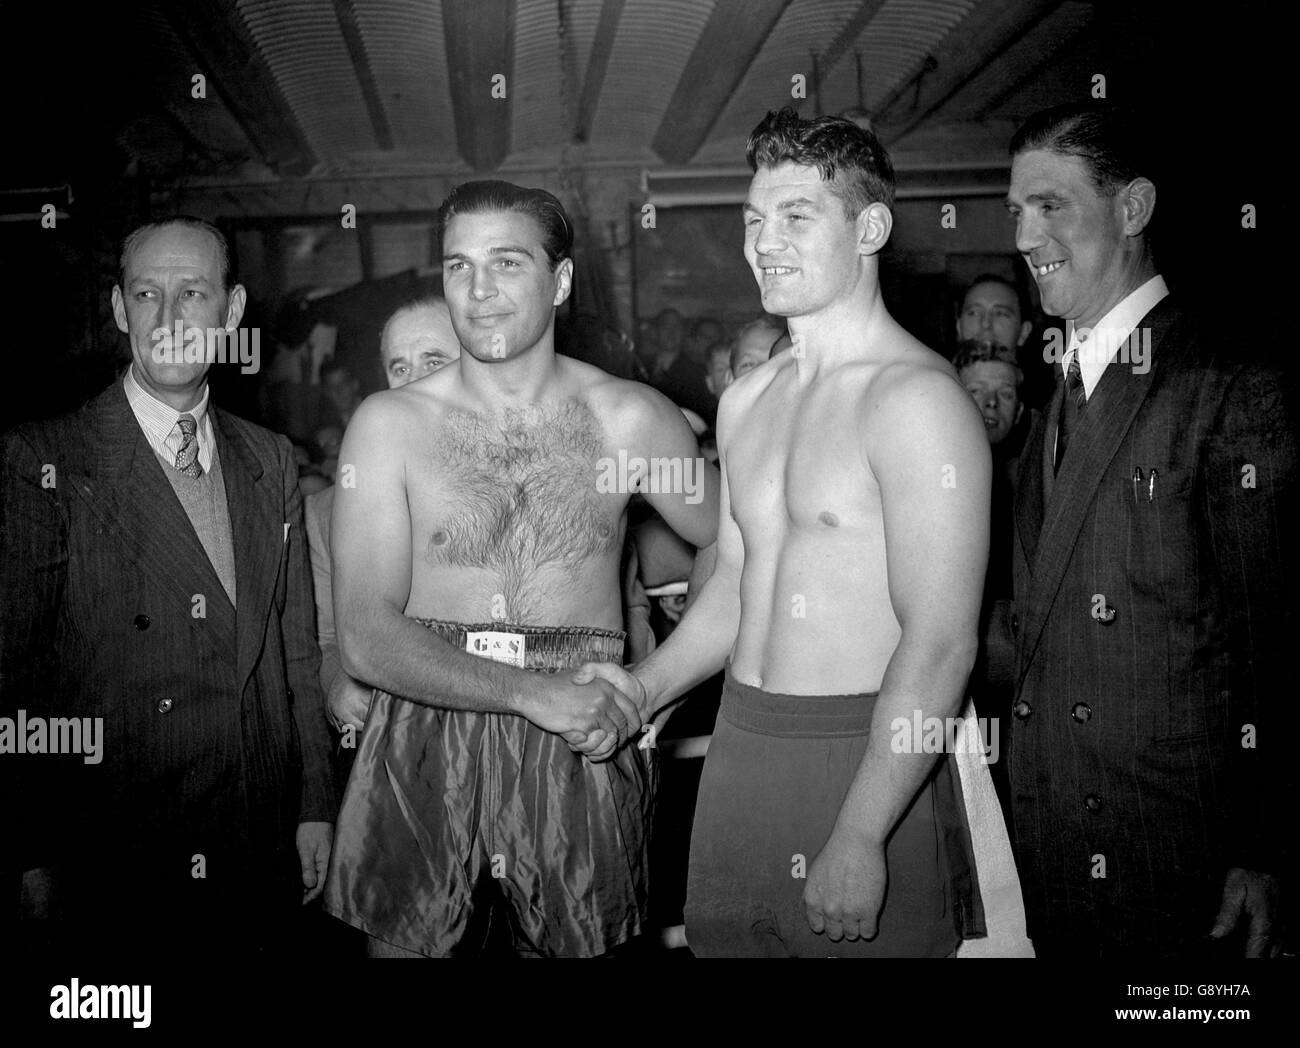 Boxing - Heavyweight - Bruce Woodcock v Lee Oma - pesée Harringay - Arena, London Banque D'Images